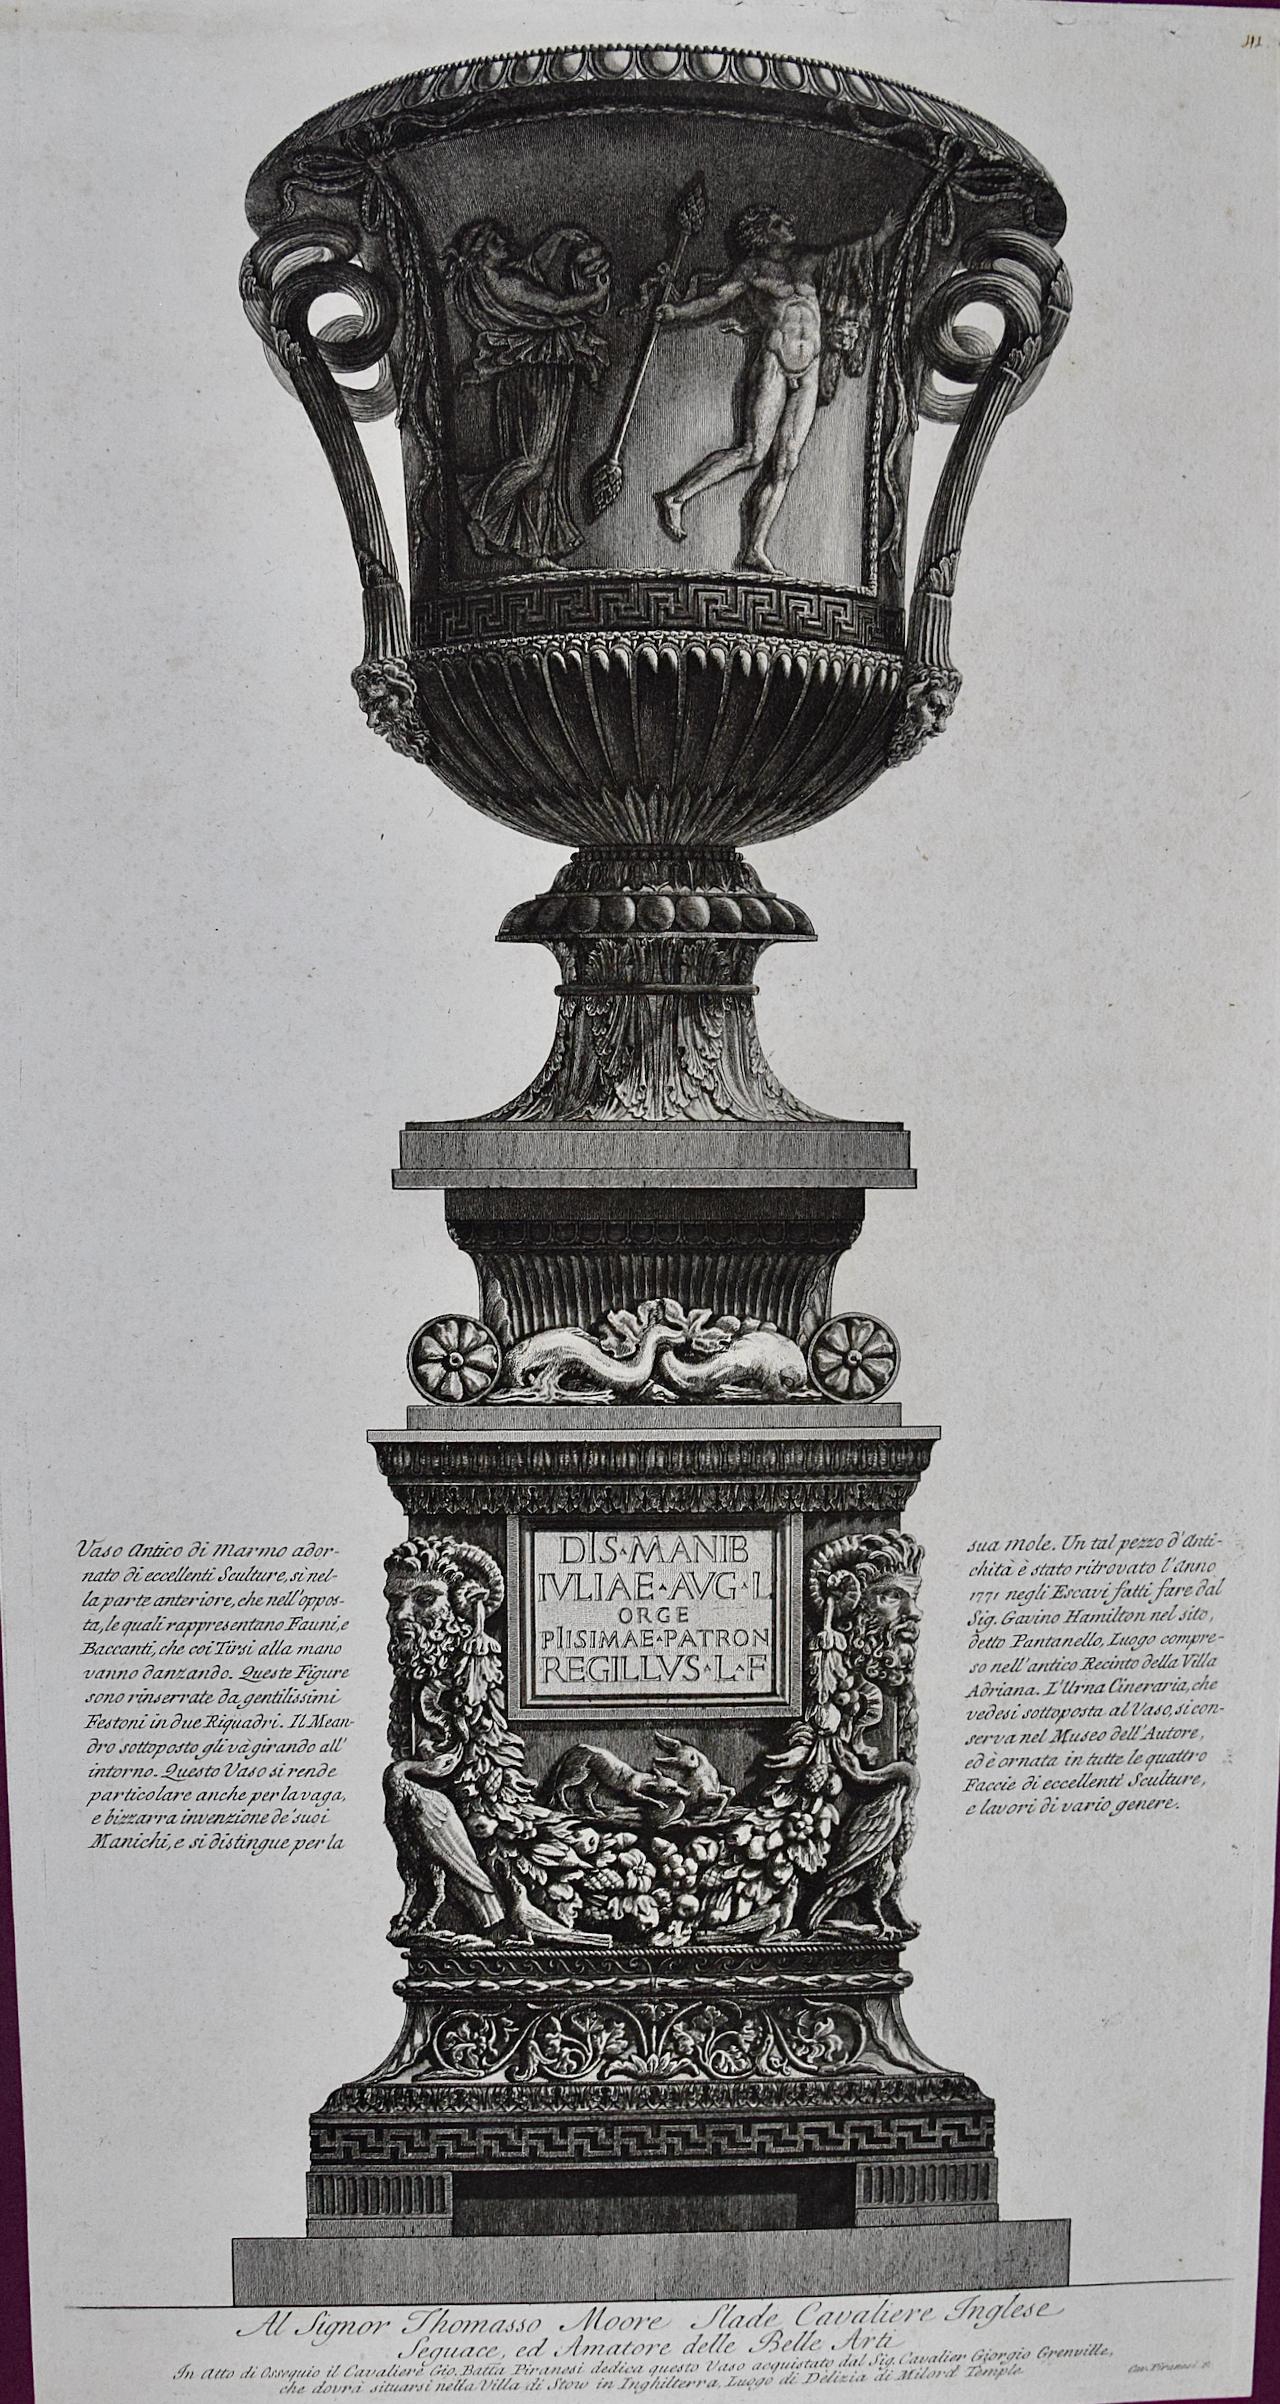 Ancient Roman Medici Marble Vase: An 18th Century Etching by Piranesi